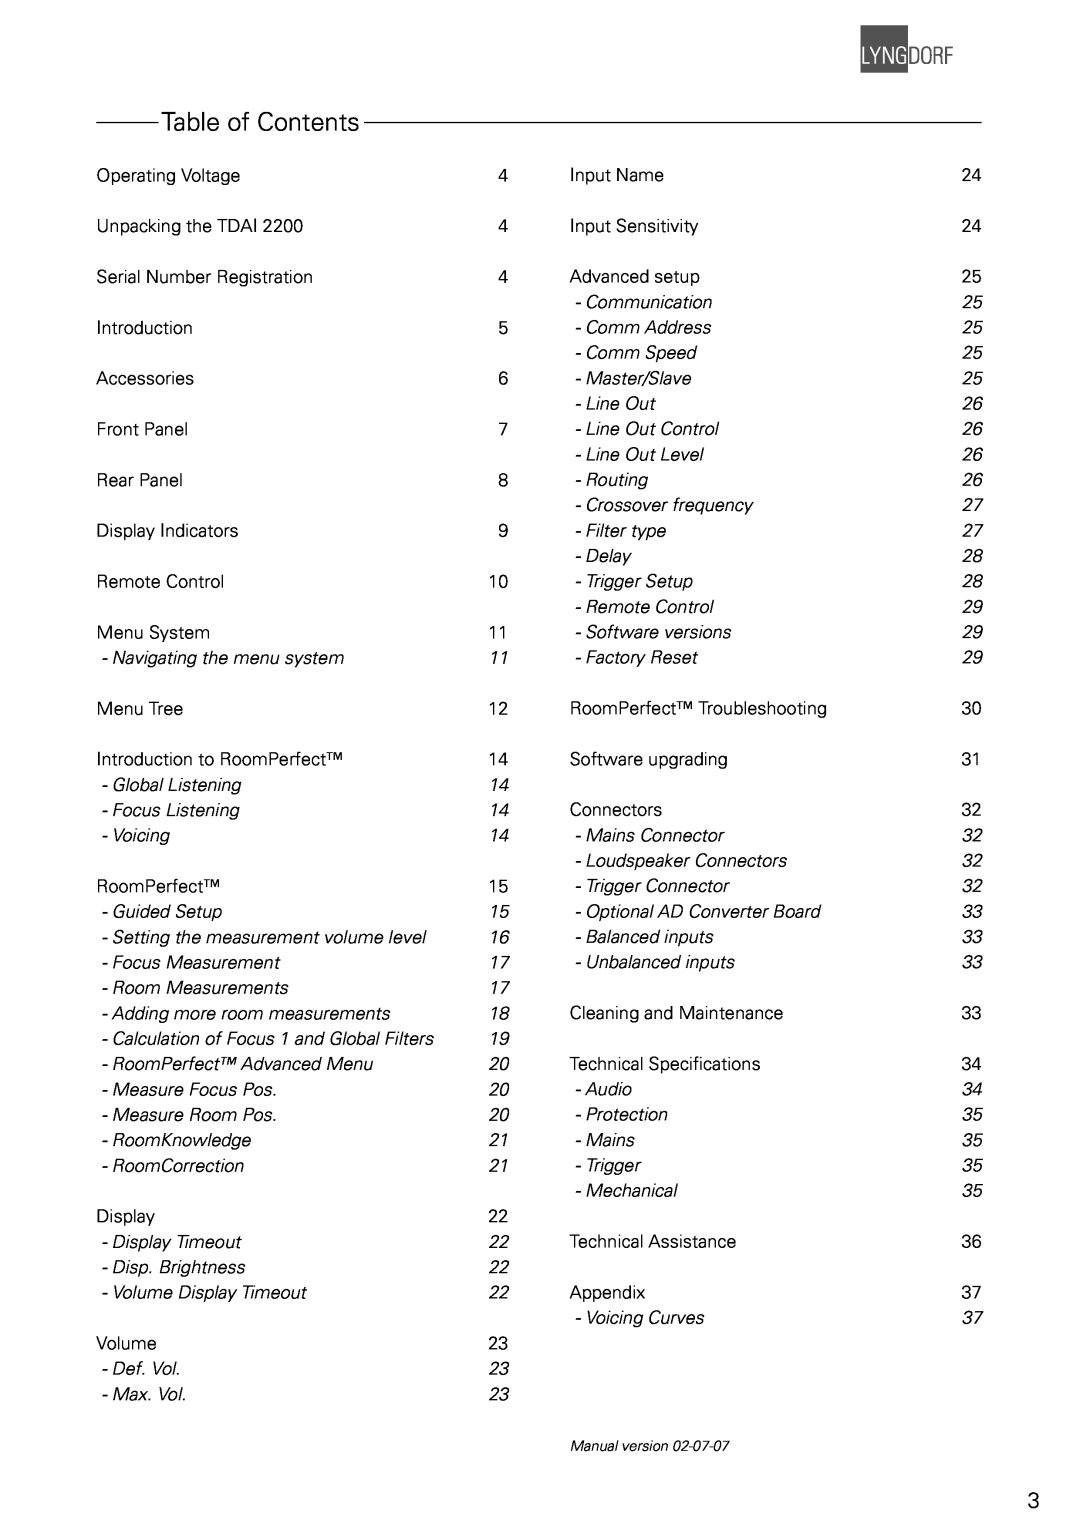 Lyngdorf Audio TDAI 2200 owner manual Table of Contents 